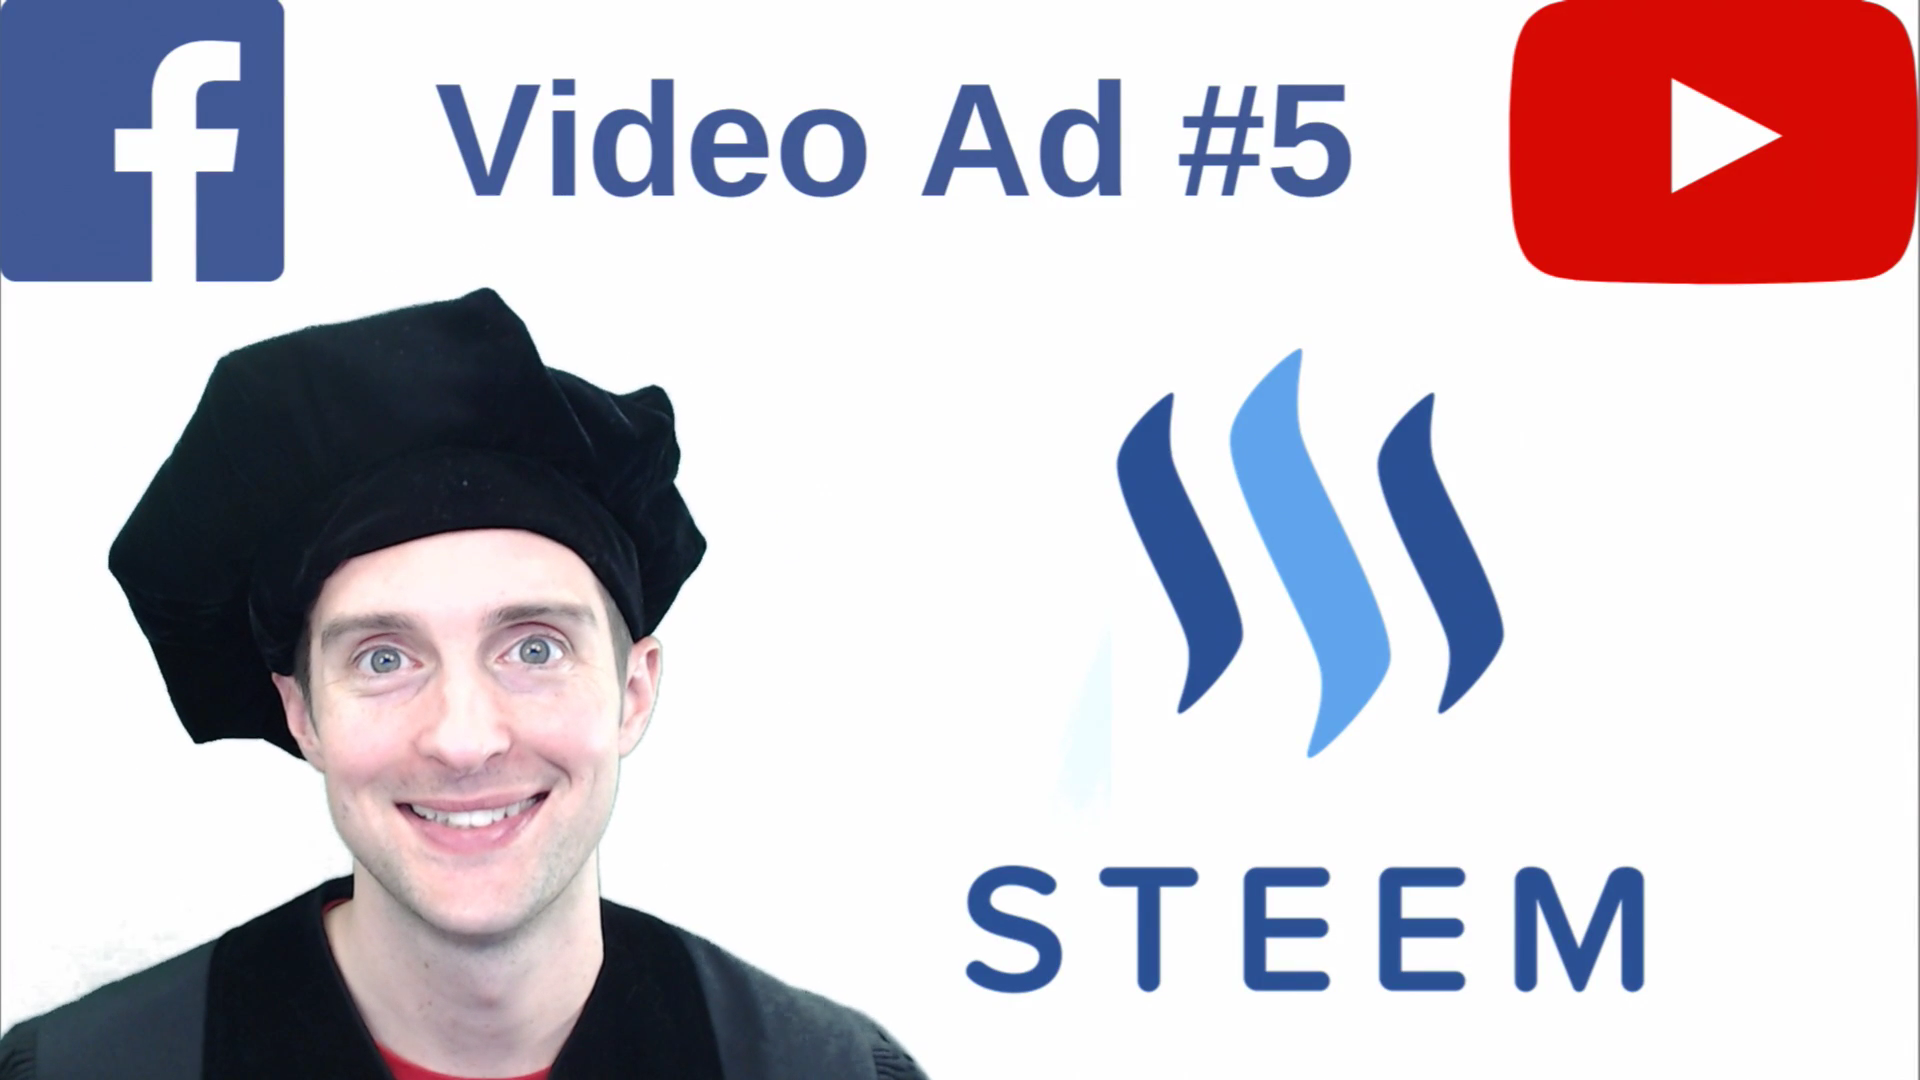 steem video ad 5.png